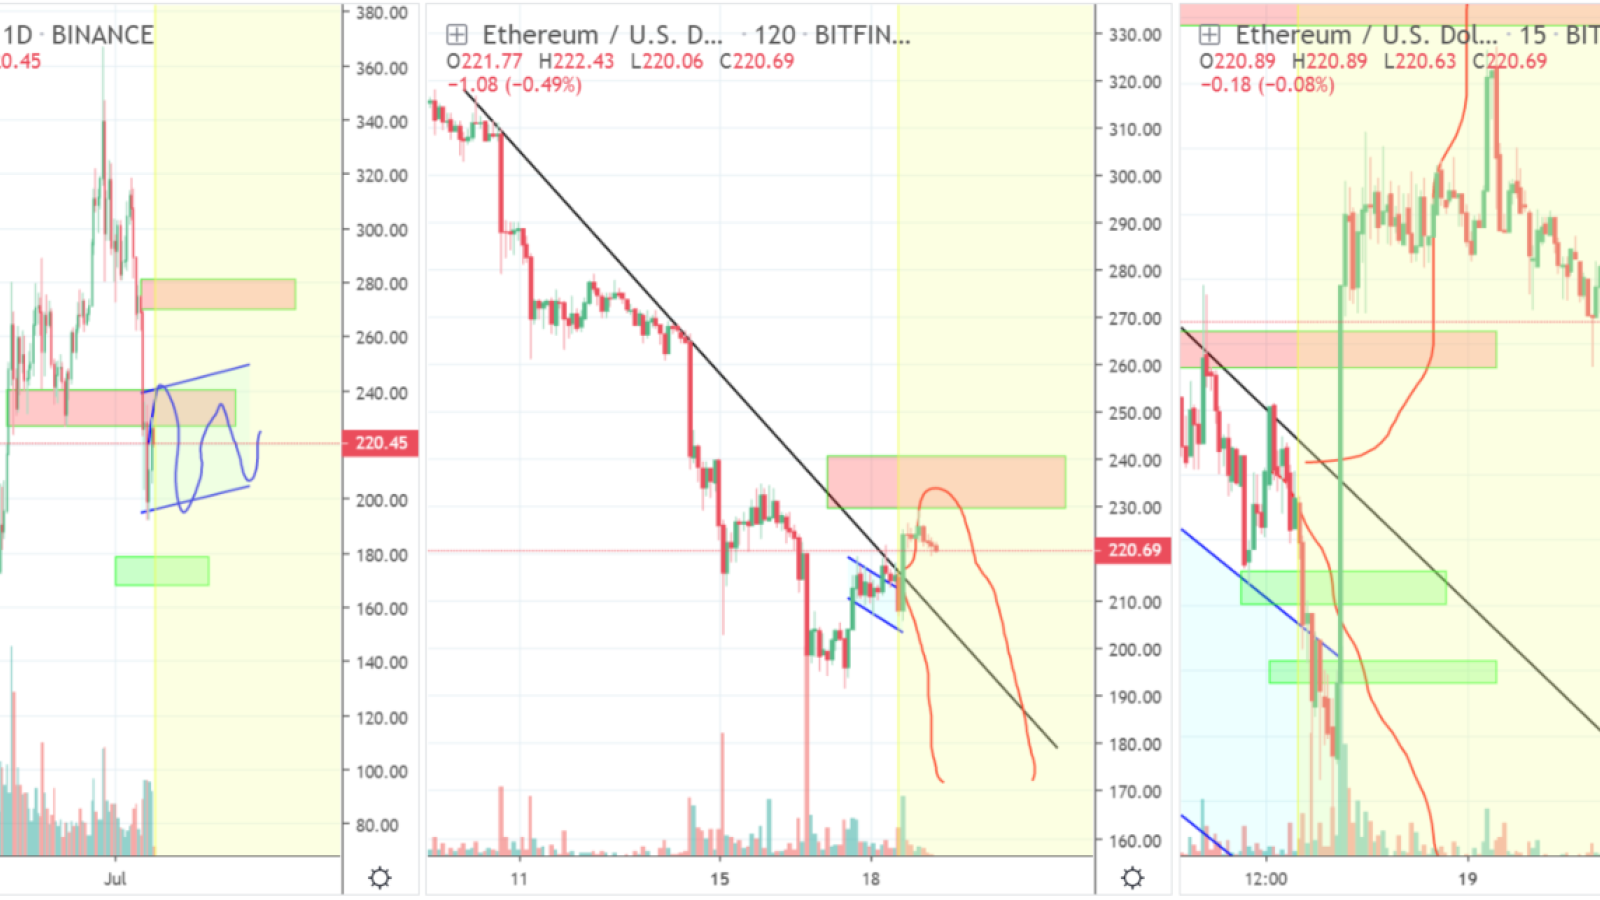 ETH downtrend continues